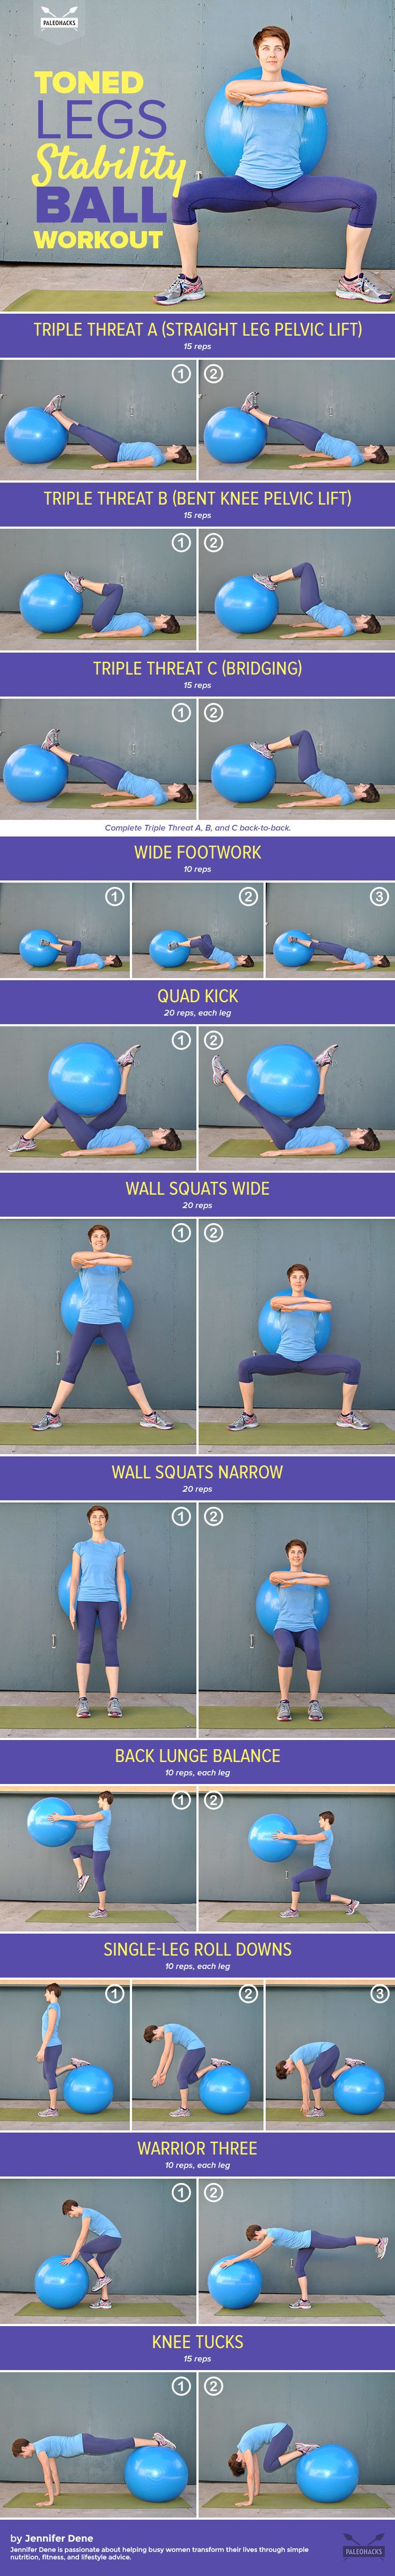 toned legs stability ball infographic